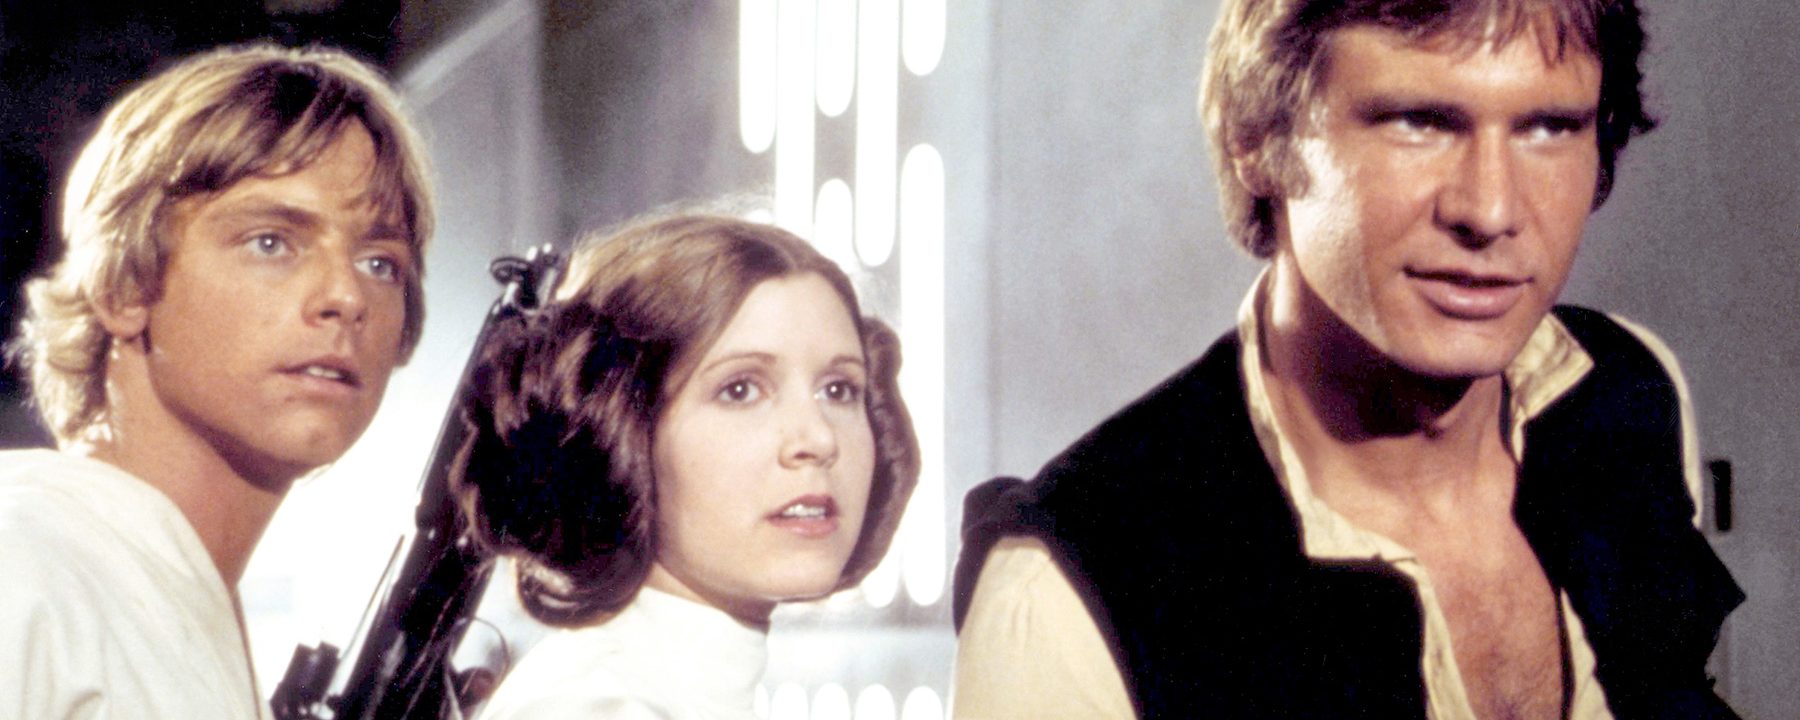 Carrie Fisher Porn Star Wars - Star Wars' Actress Carrie Fisher Remembered on May the Fourth - InsideHook